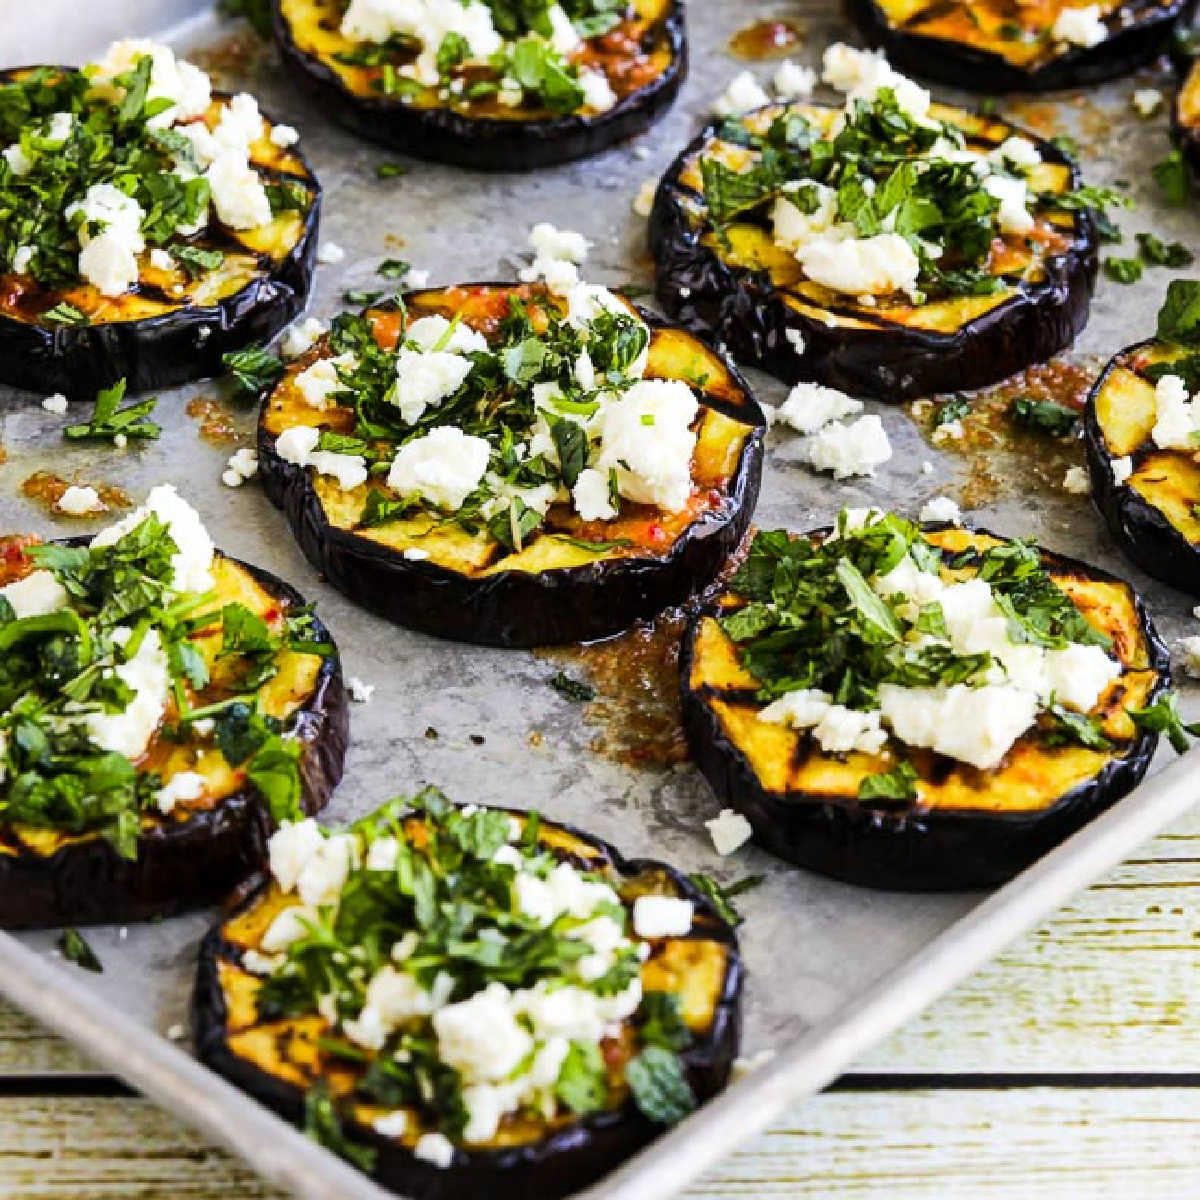 Grilled Eggplant with Feta and Herbs shown on sheet pan.